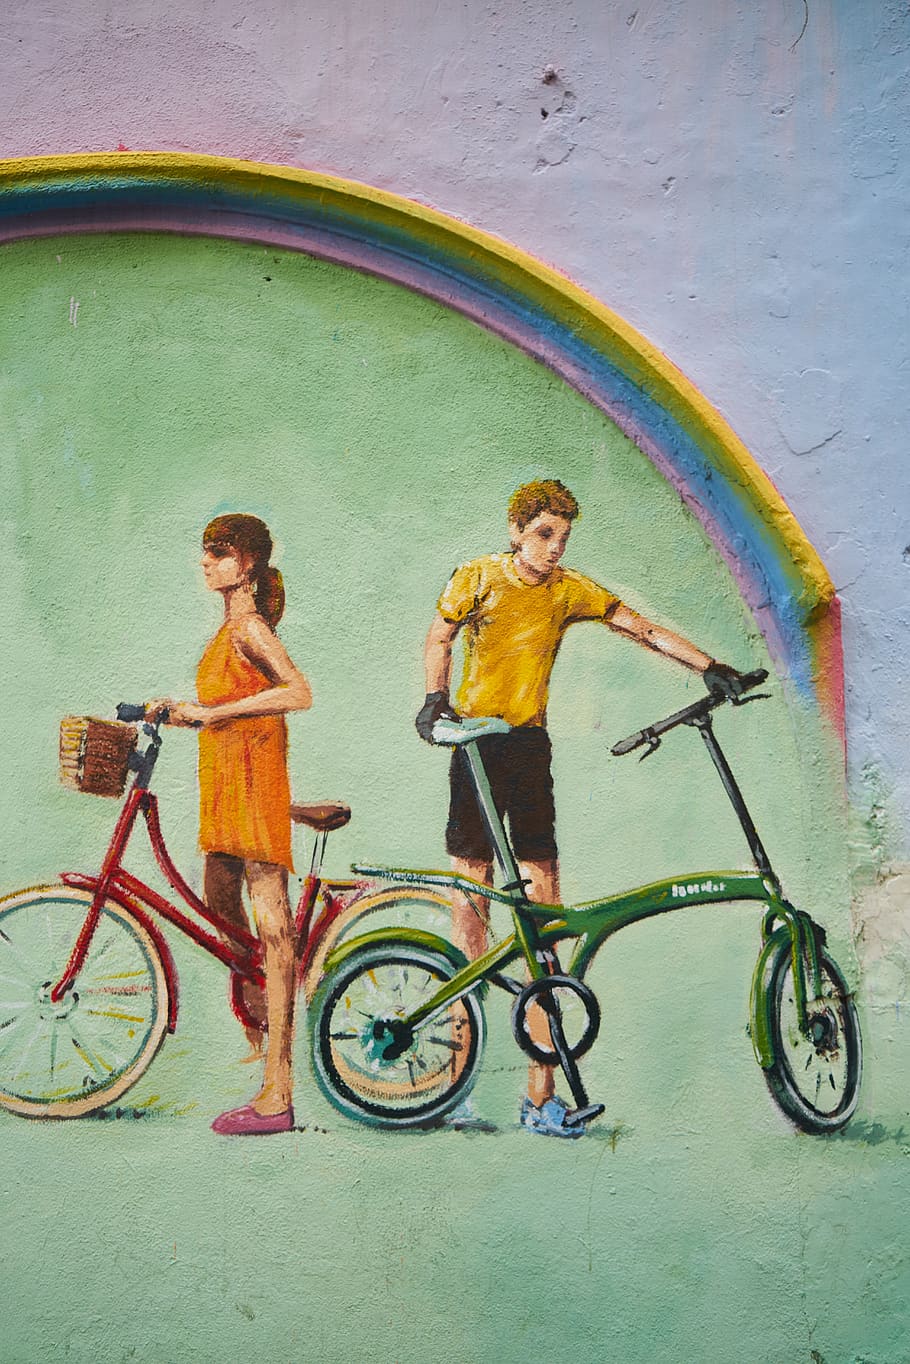 graffiti, bicycle, wall, art, street, urban, color, painting, bicycles, paint